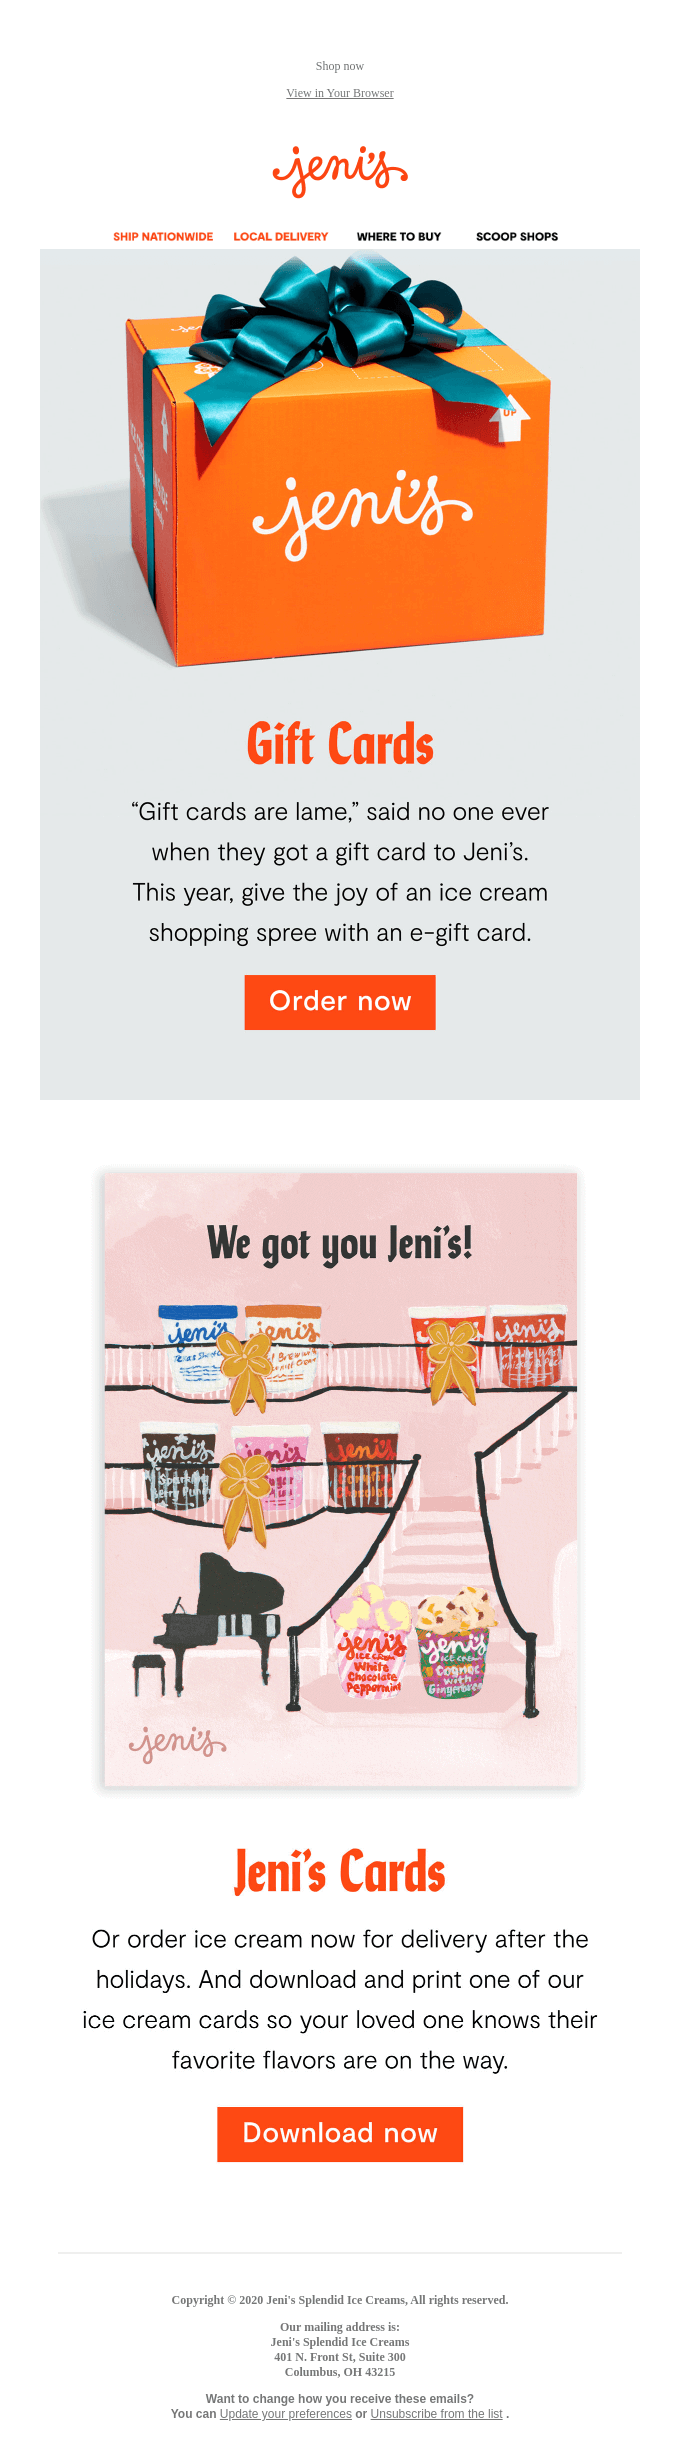 Jeni's Gift Card Example Email